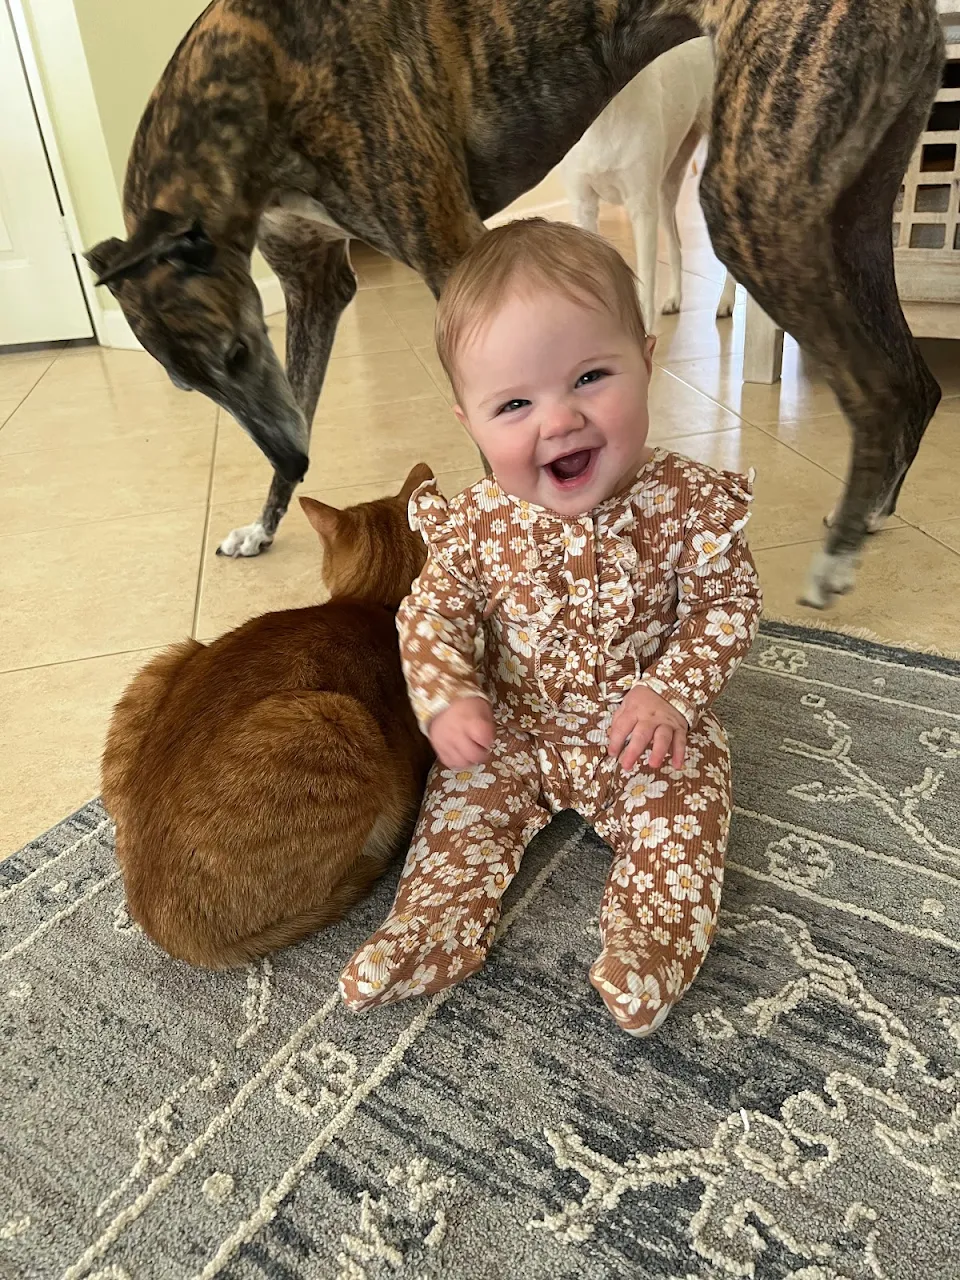 Safe To Say My Daughter Loves Having All The Animals!